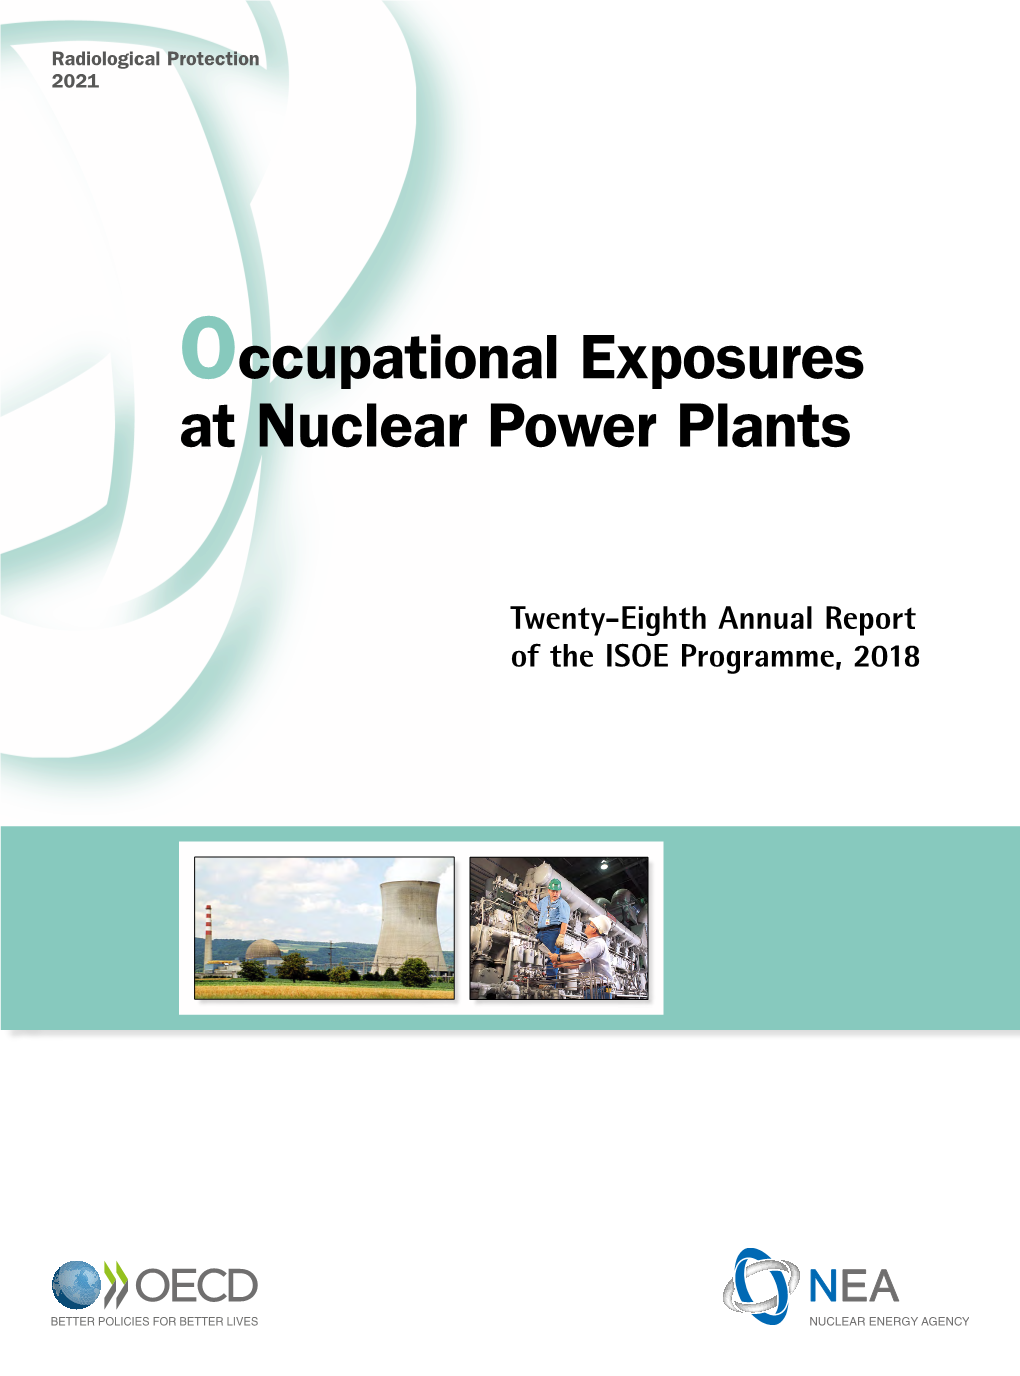 Occupational Exposures at Nuclear Power Plants: Twenty-Eighth Annual Report of the ISOE Programme, 2018